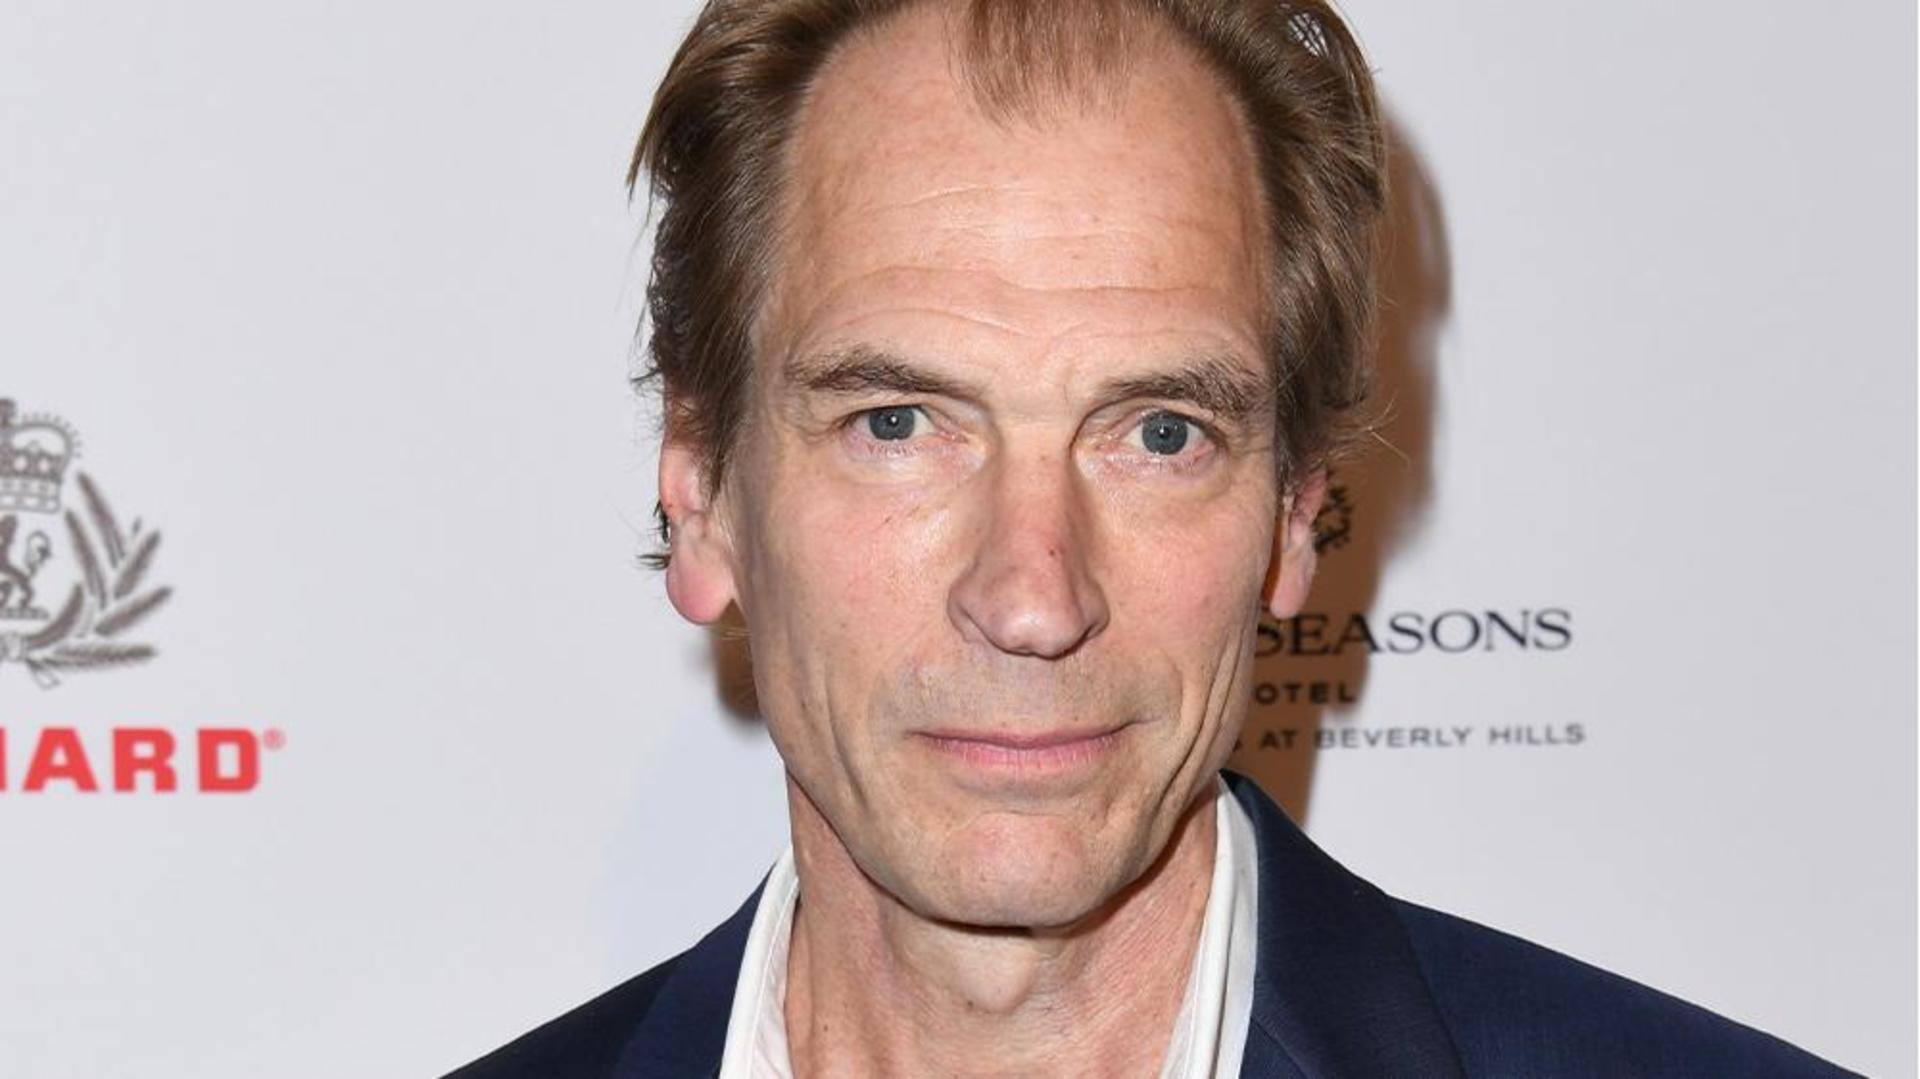 Search for Julian Sands: Human remains discovered where actor disappeared